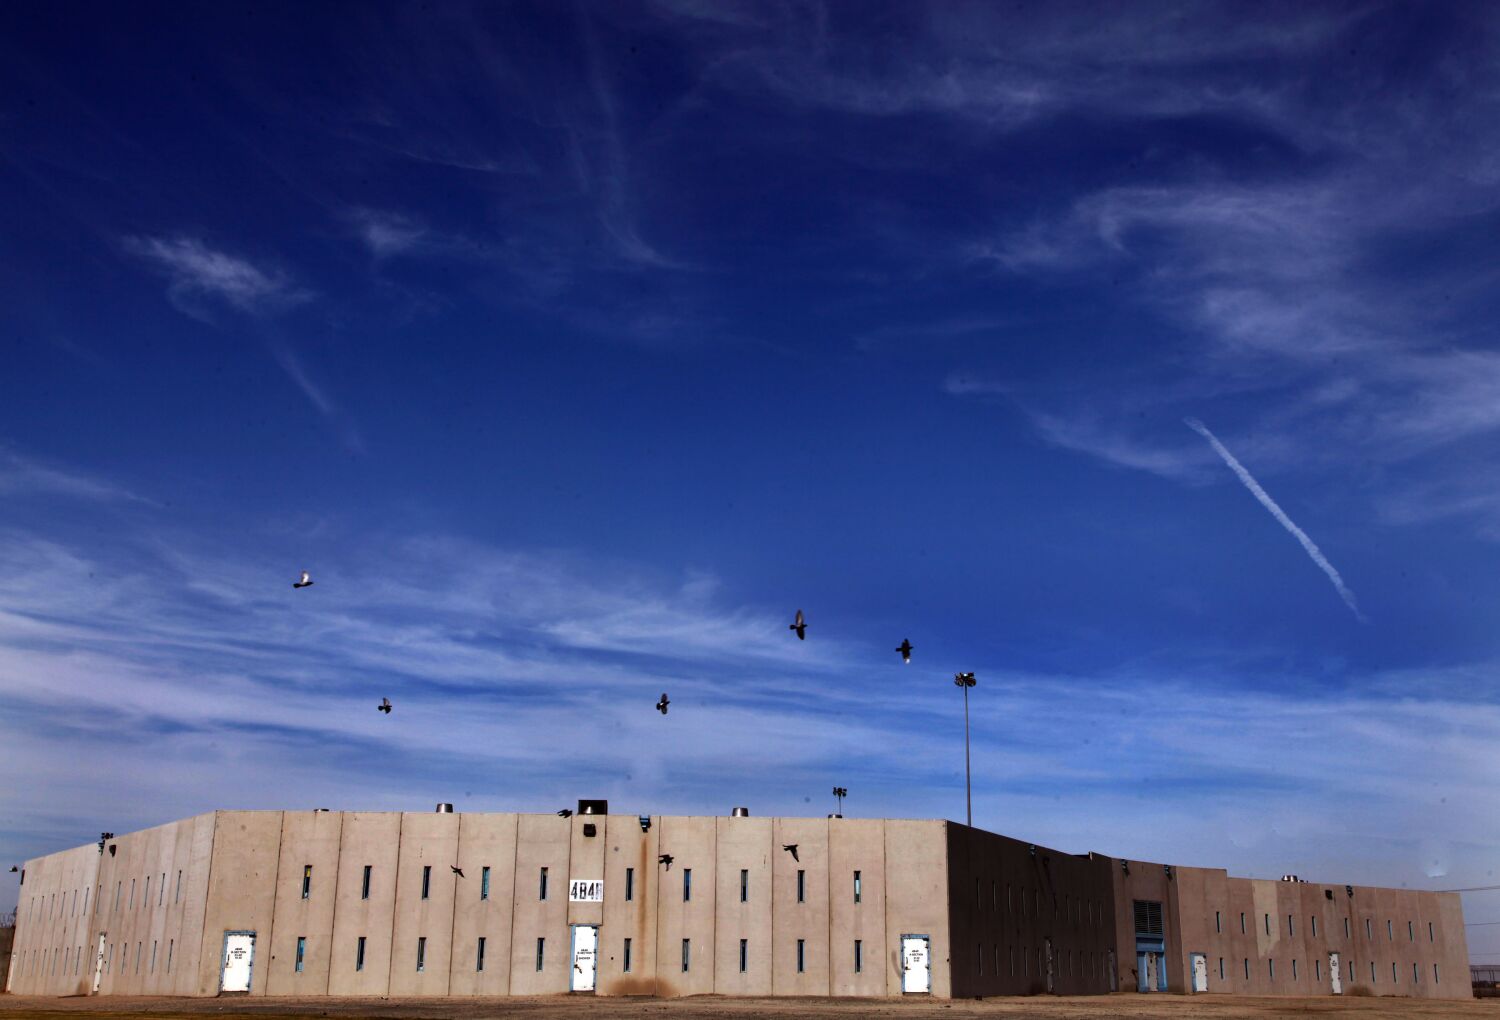 Special delivery: Drones are smuggling contraband into California prisons, feds say